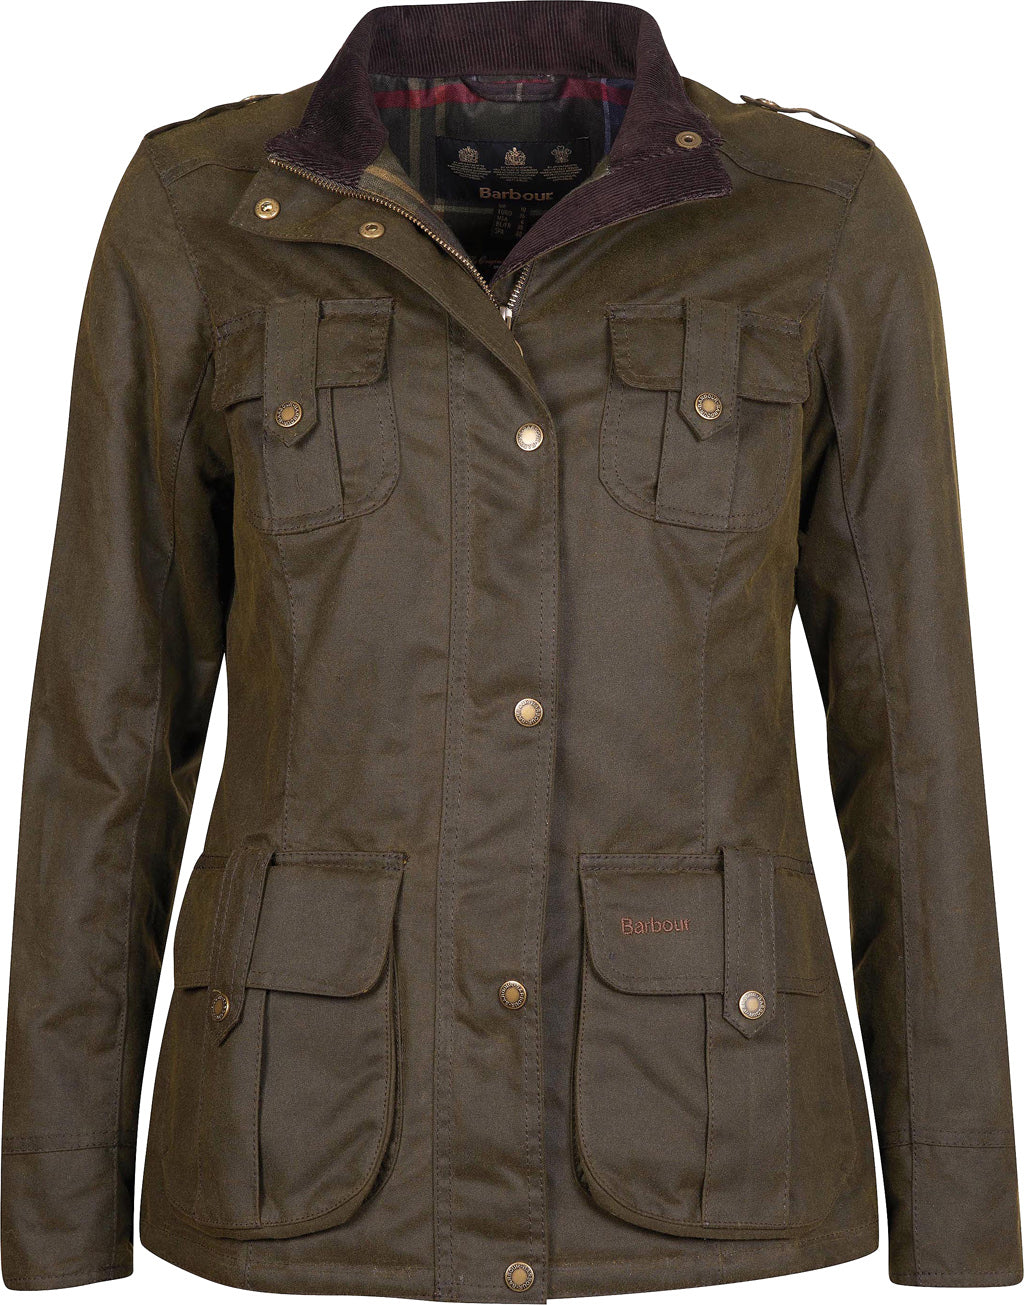 Barbour Classic Defence Waxed Jacket - Women's